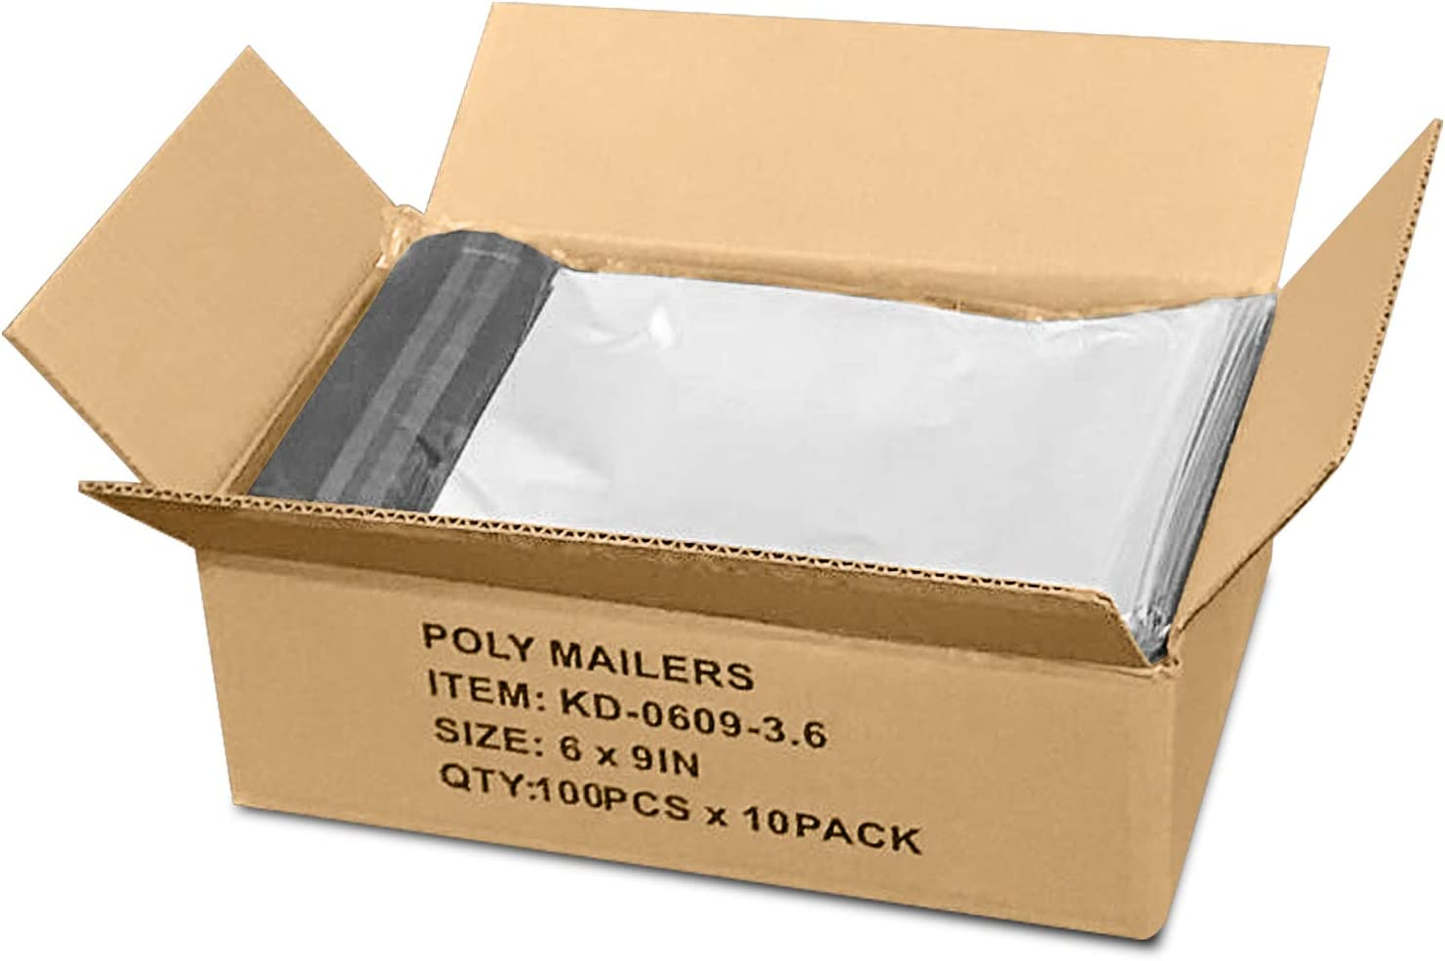 6 X 9 Inch White Poly Mailer Envelopes Shipping Bags Self Sealing, Tear&Water-Resistant Postal Bags (6“ X 9" Inch, 1000 Pcs)